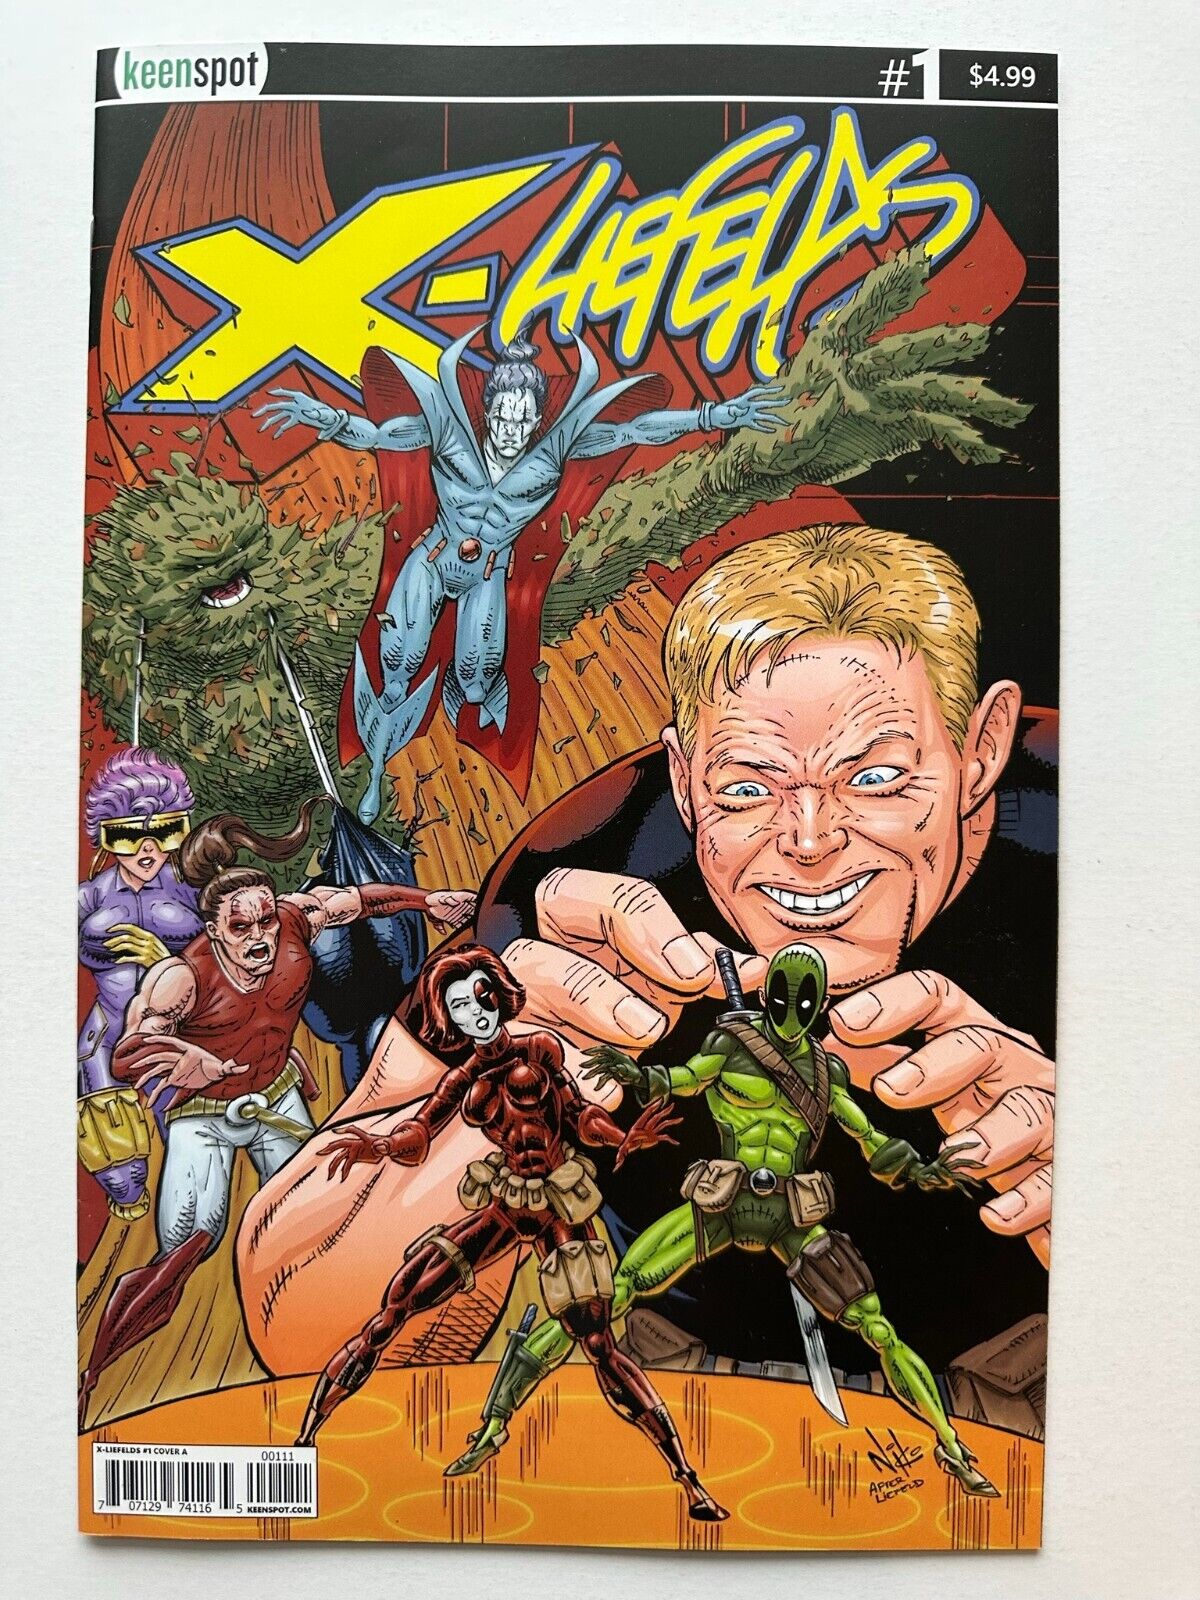 X-LIEFELDS #1 (NM), First Printing, Keenspot 2019